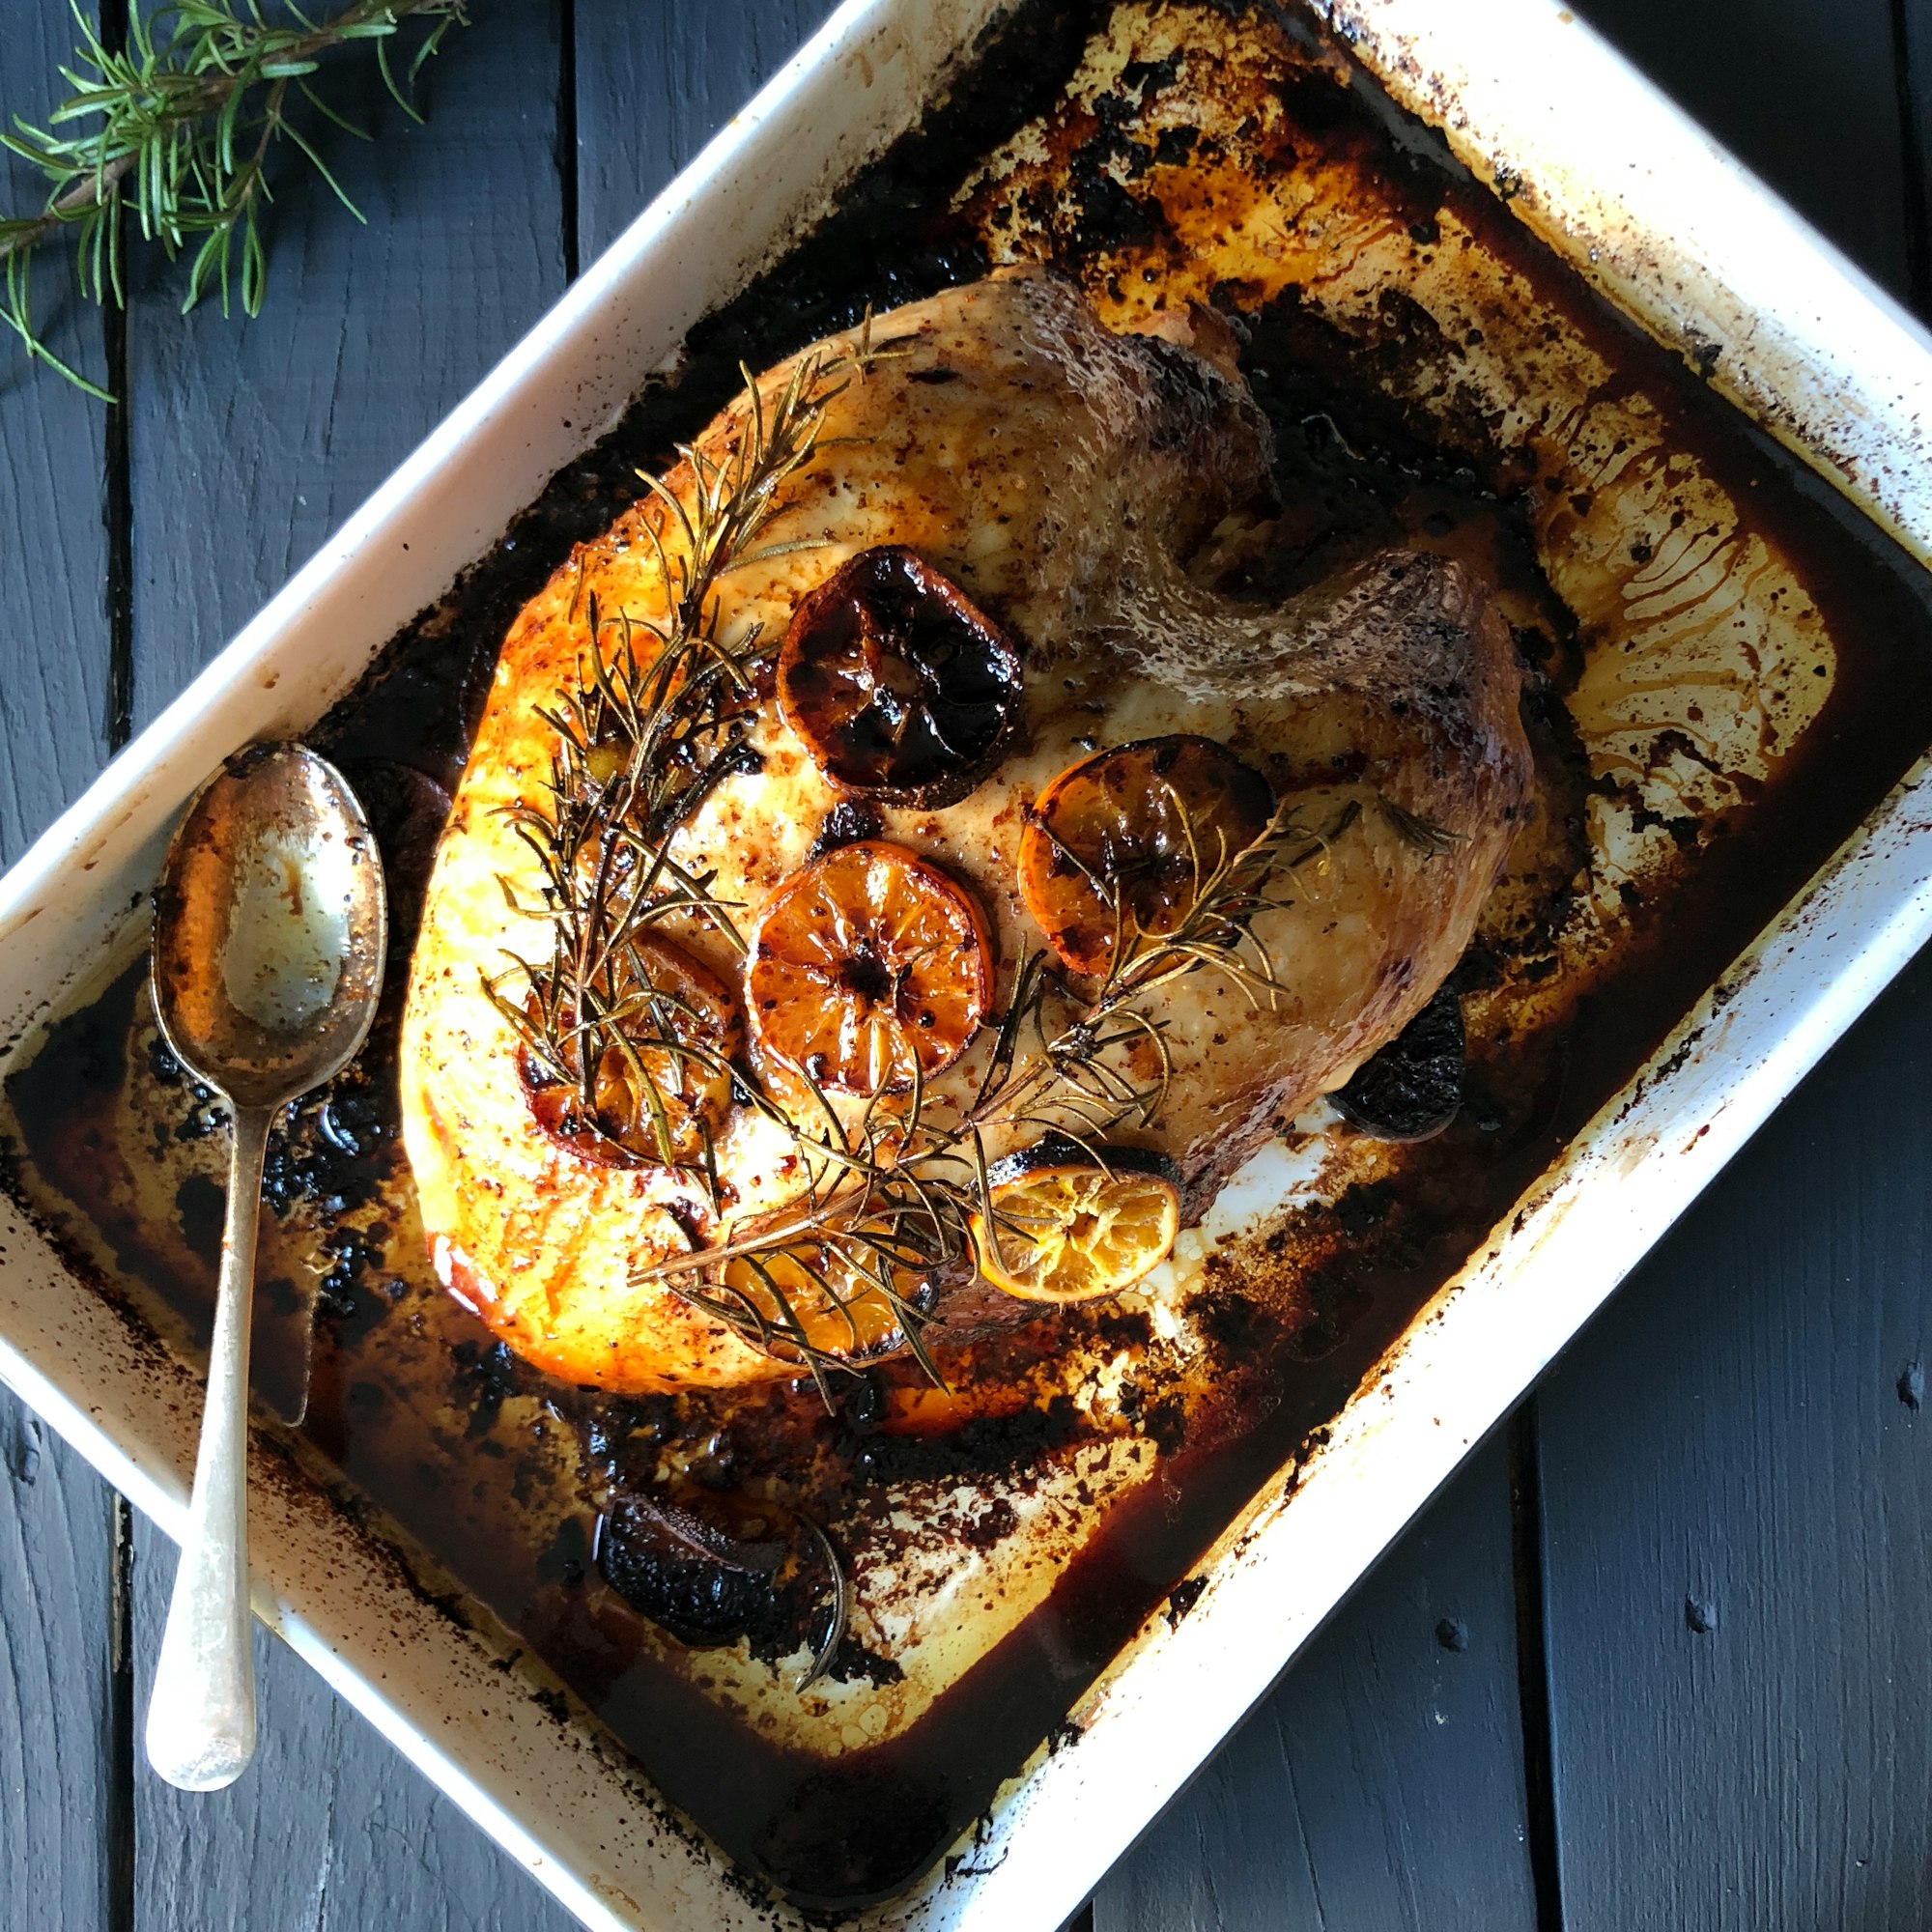 Christmas turkey - a beautiful roasted turkey crown ready for the Christmas table